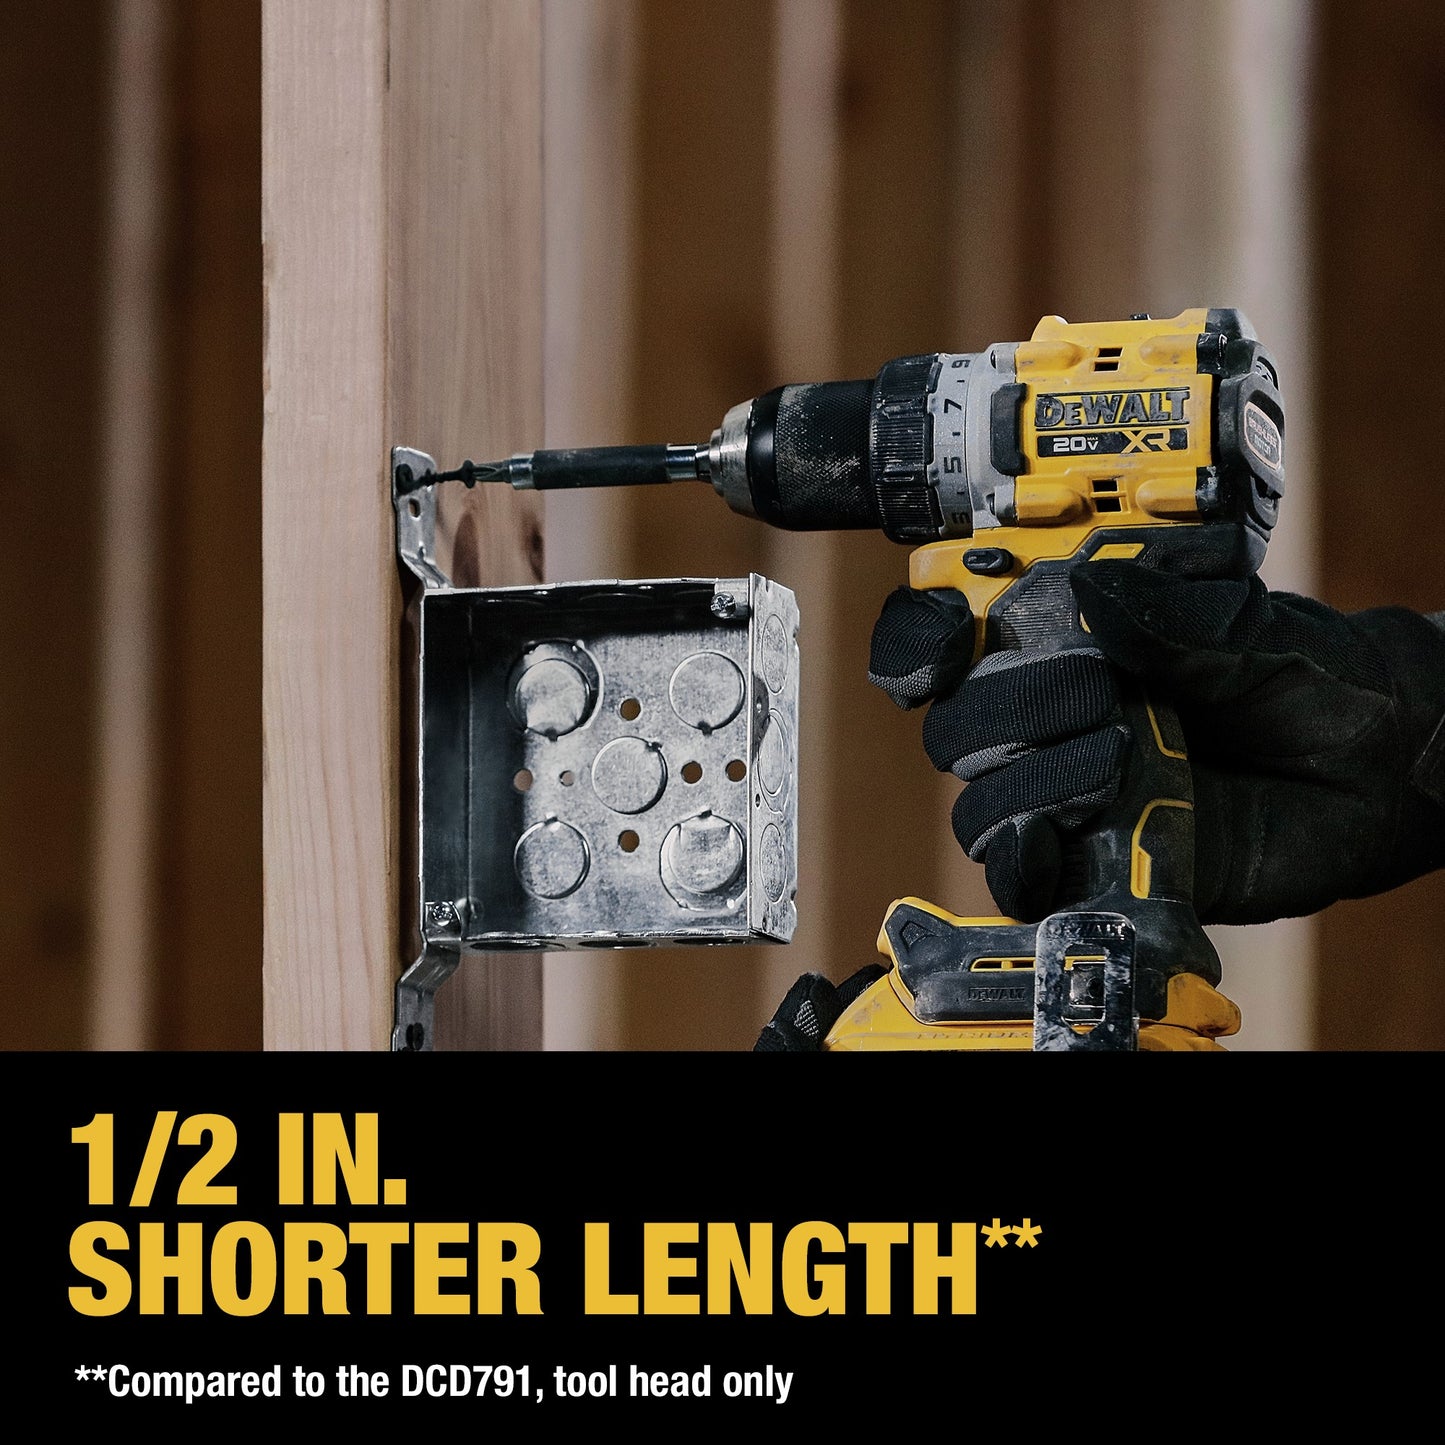 DEWALT 20V MAX* XR Brushless Cordless 1/2 in. Drill/Driver and 1/4 in. Impact Driver Kit (DCK248D2)